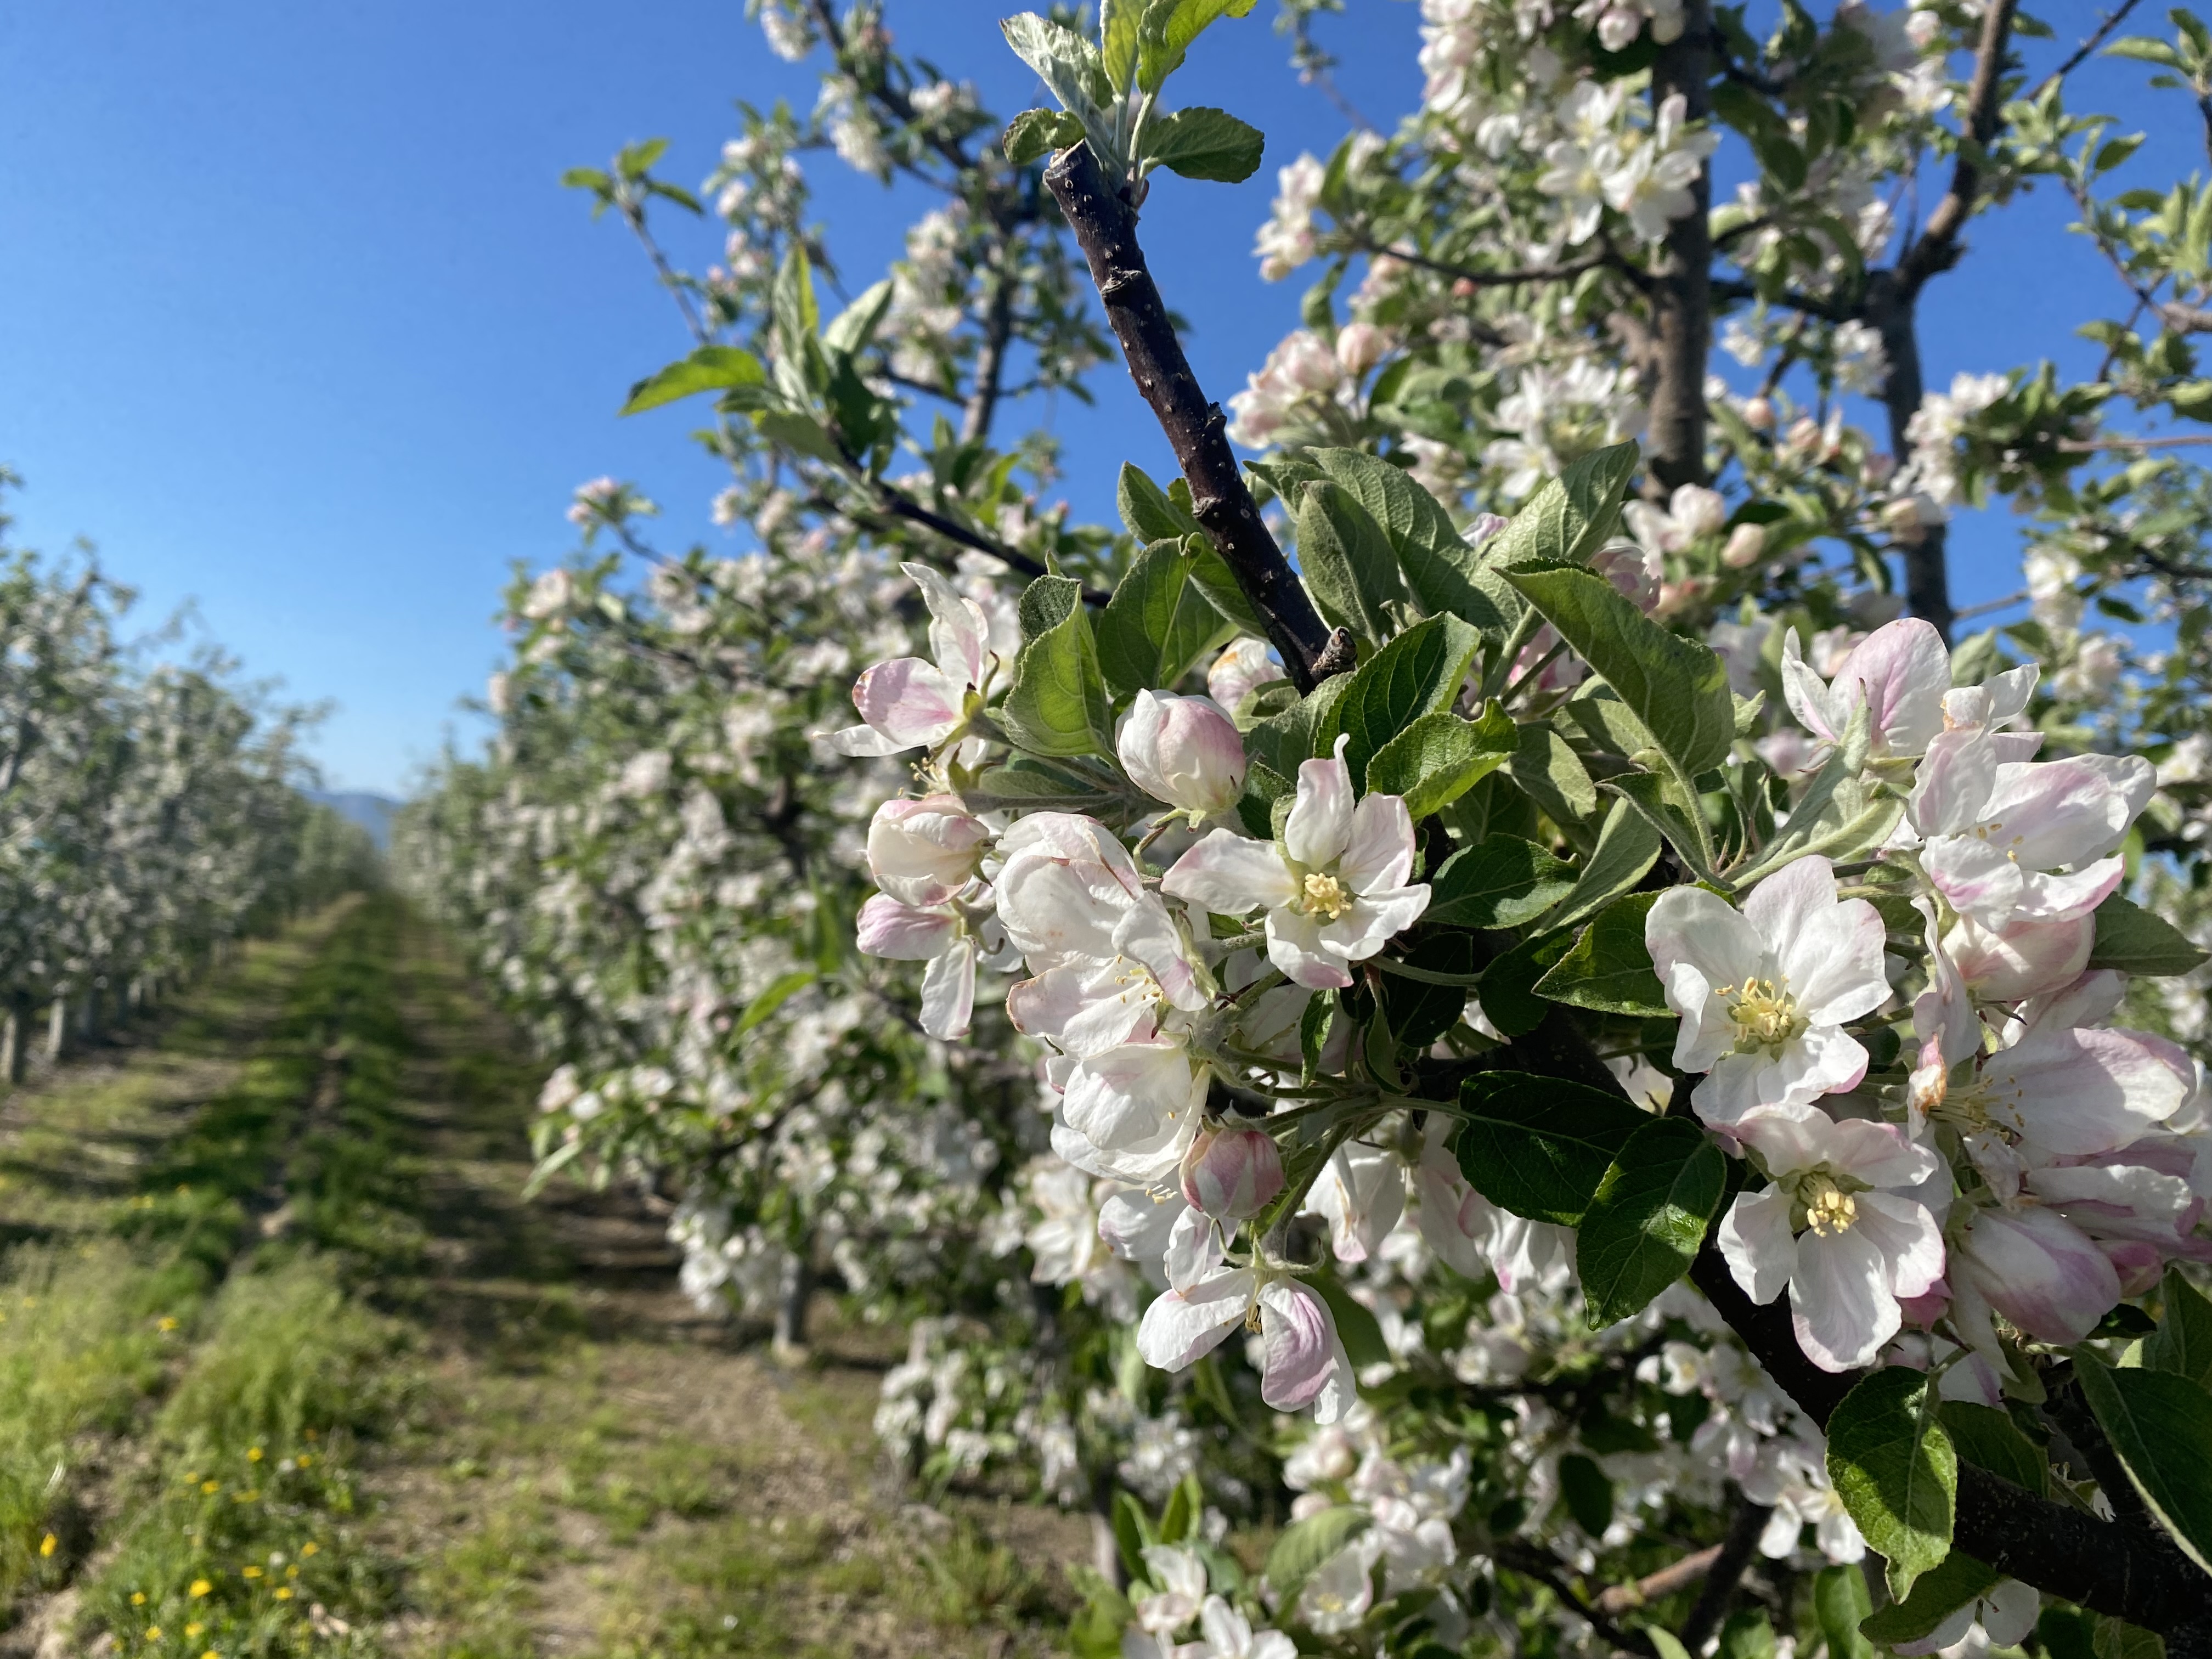 Red Delicious apples bloom in the strong sun of late April as bees work to pollinate them on Jim Willard’s farm eight miles north of Prosser, Washington. 